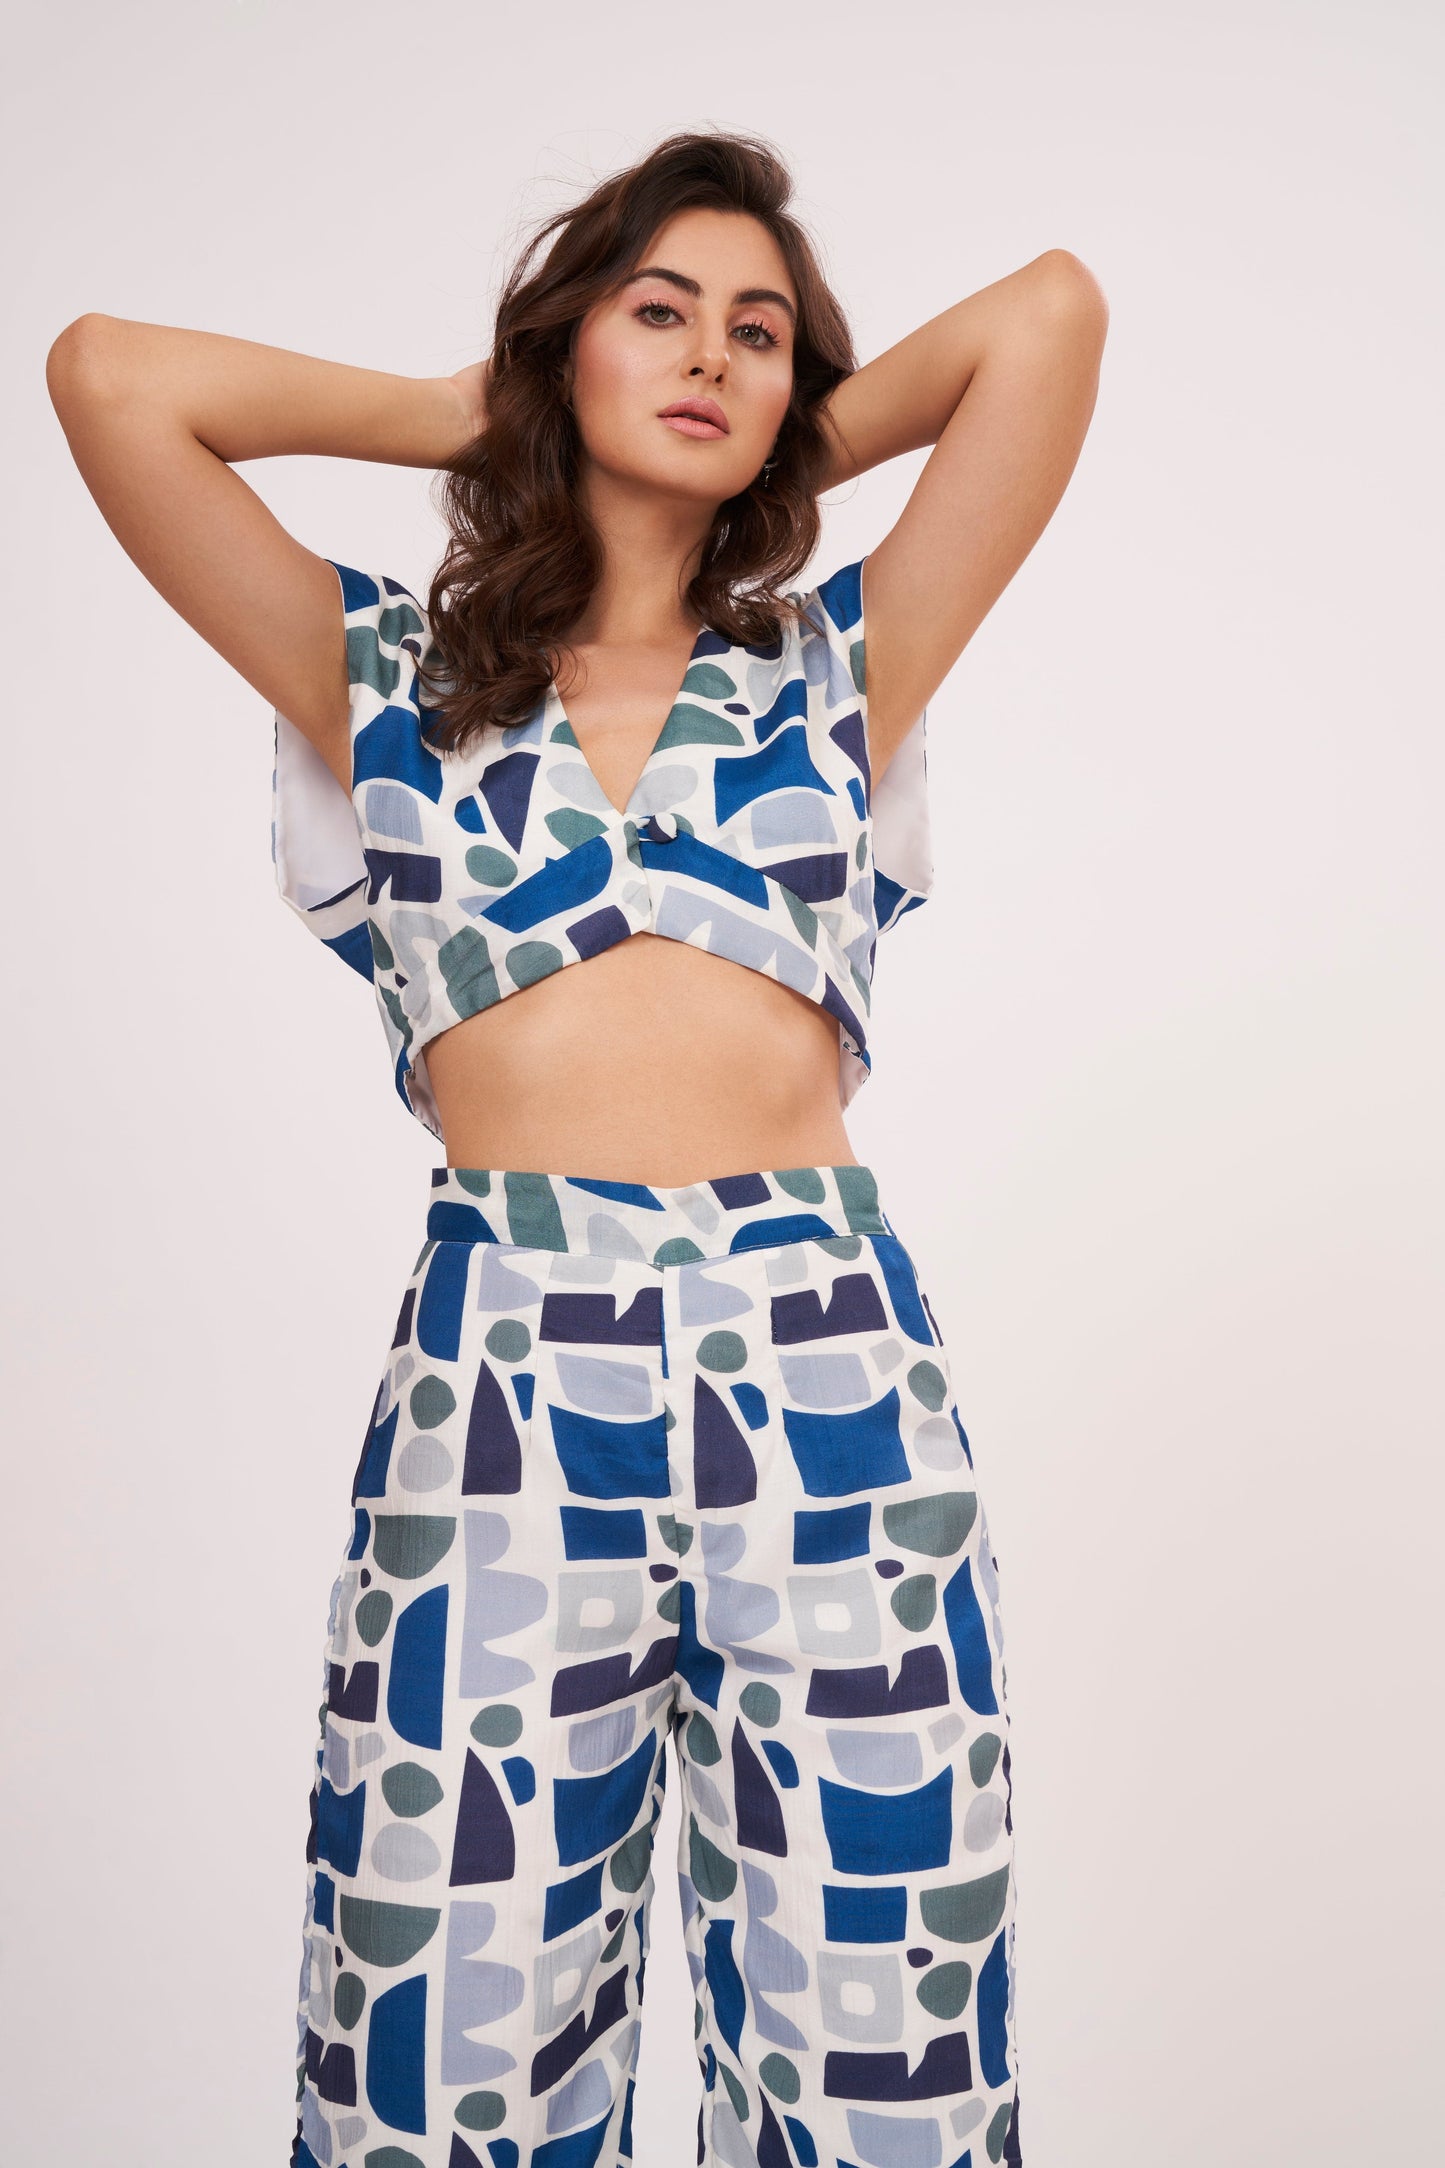 Image of a printed crop top from Designer Co Ord Set made from premium muslin fabric. Trendy v-neck and bold geometric design in vibrant colors.